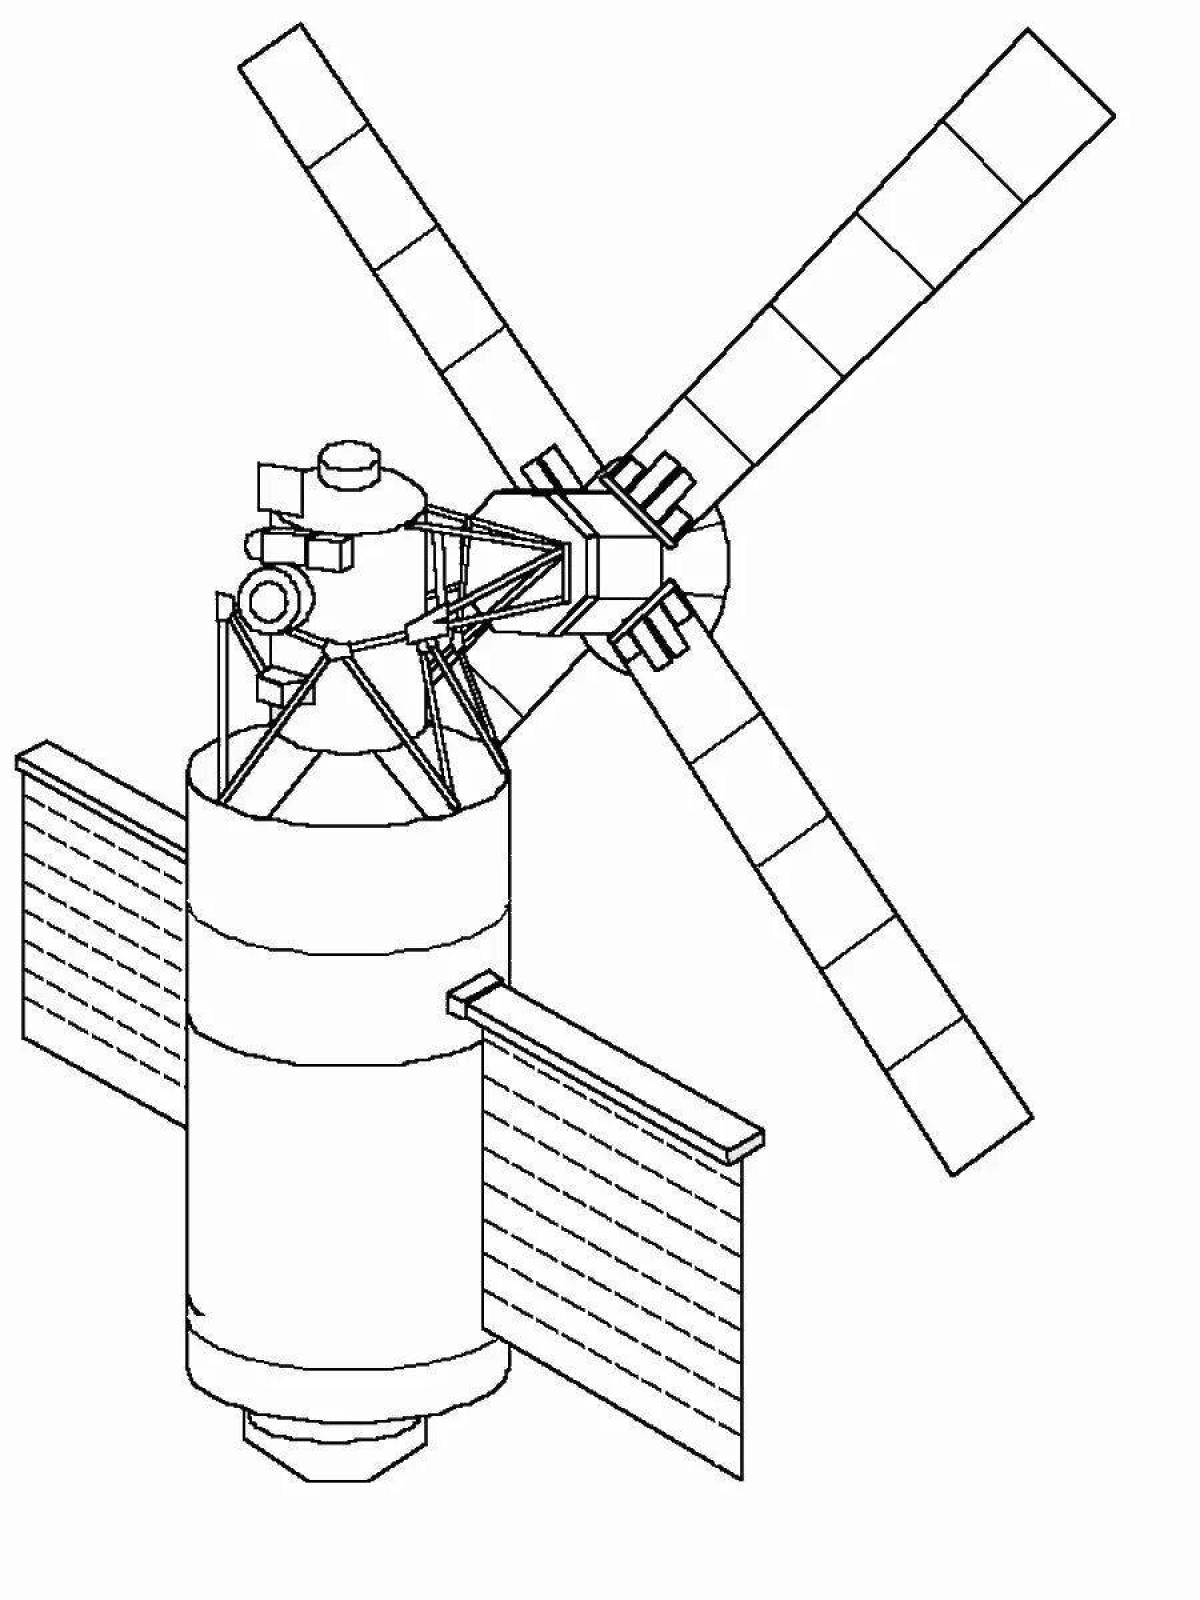 Intergalactic space station coloring page